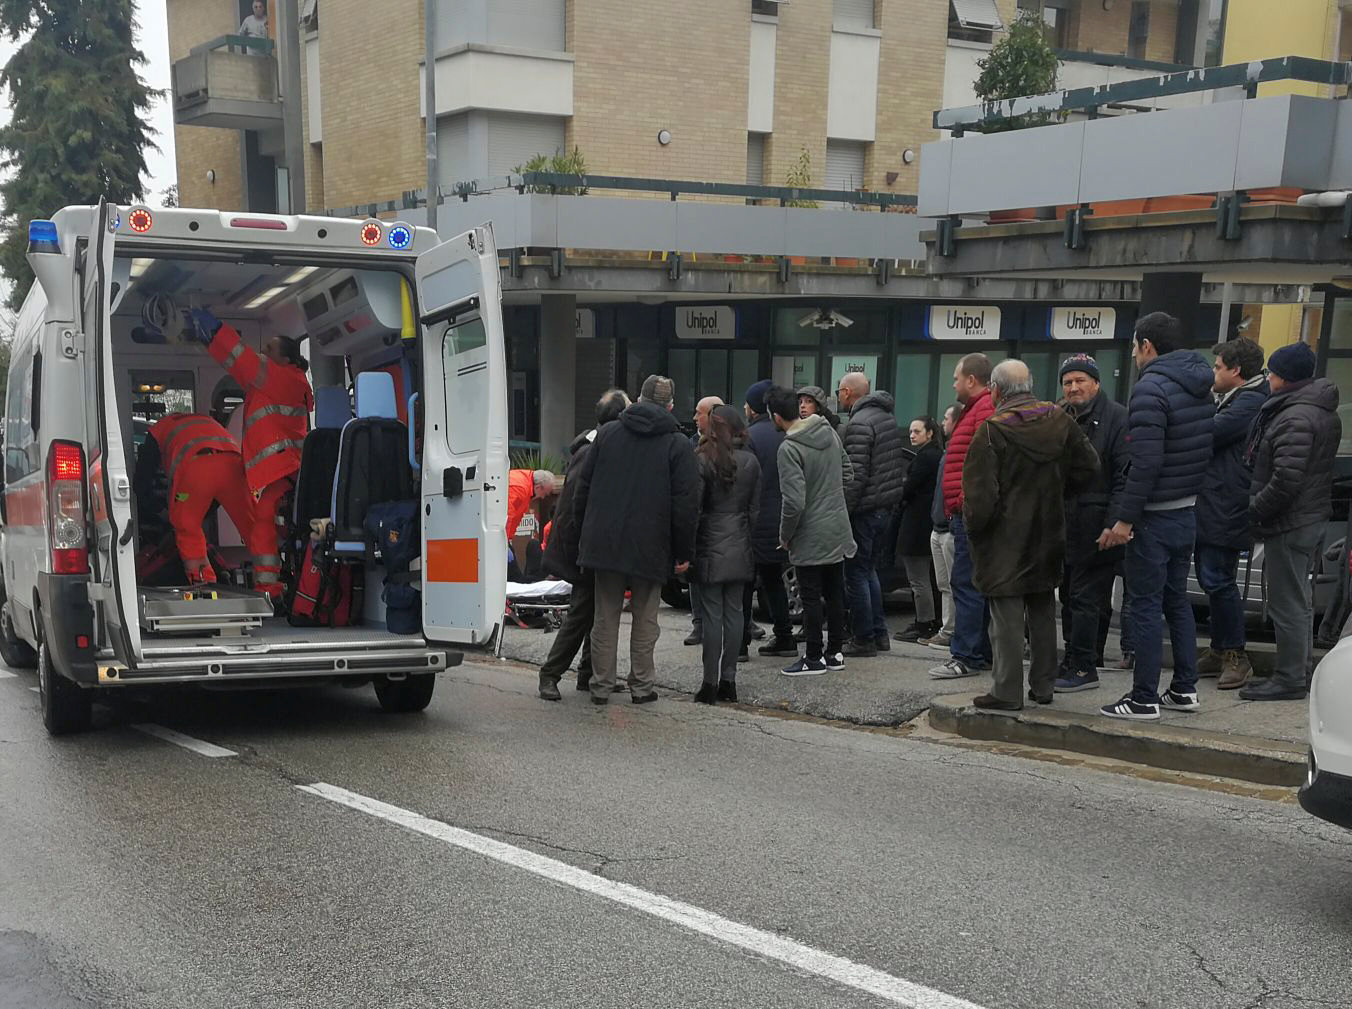 People look at healthcare personnel taking care of an injured person after being shot by gunfire from a vehicle, in Macerata, Italy, February 3, 2018.